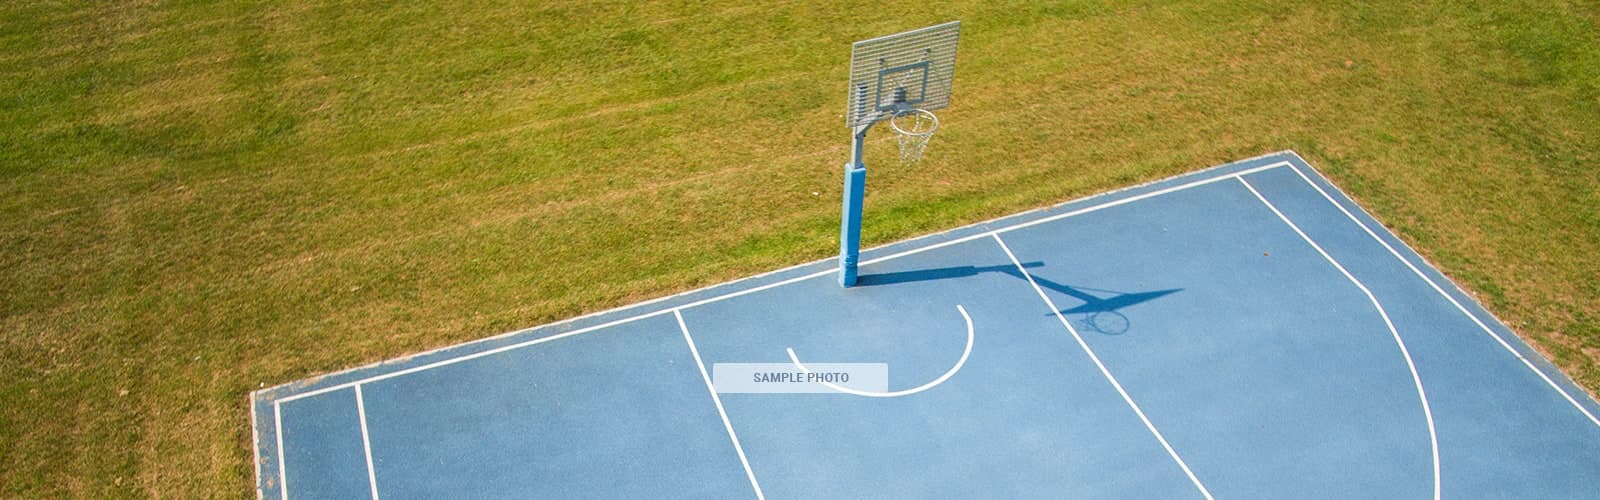 East Lake Elementary School Outdoor Basketball Courts in Orlando Florida